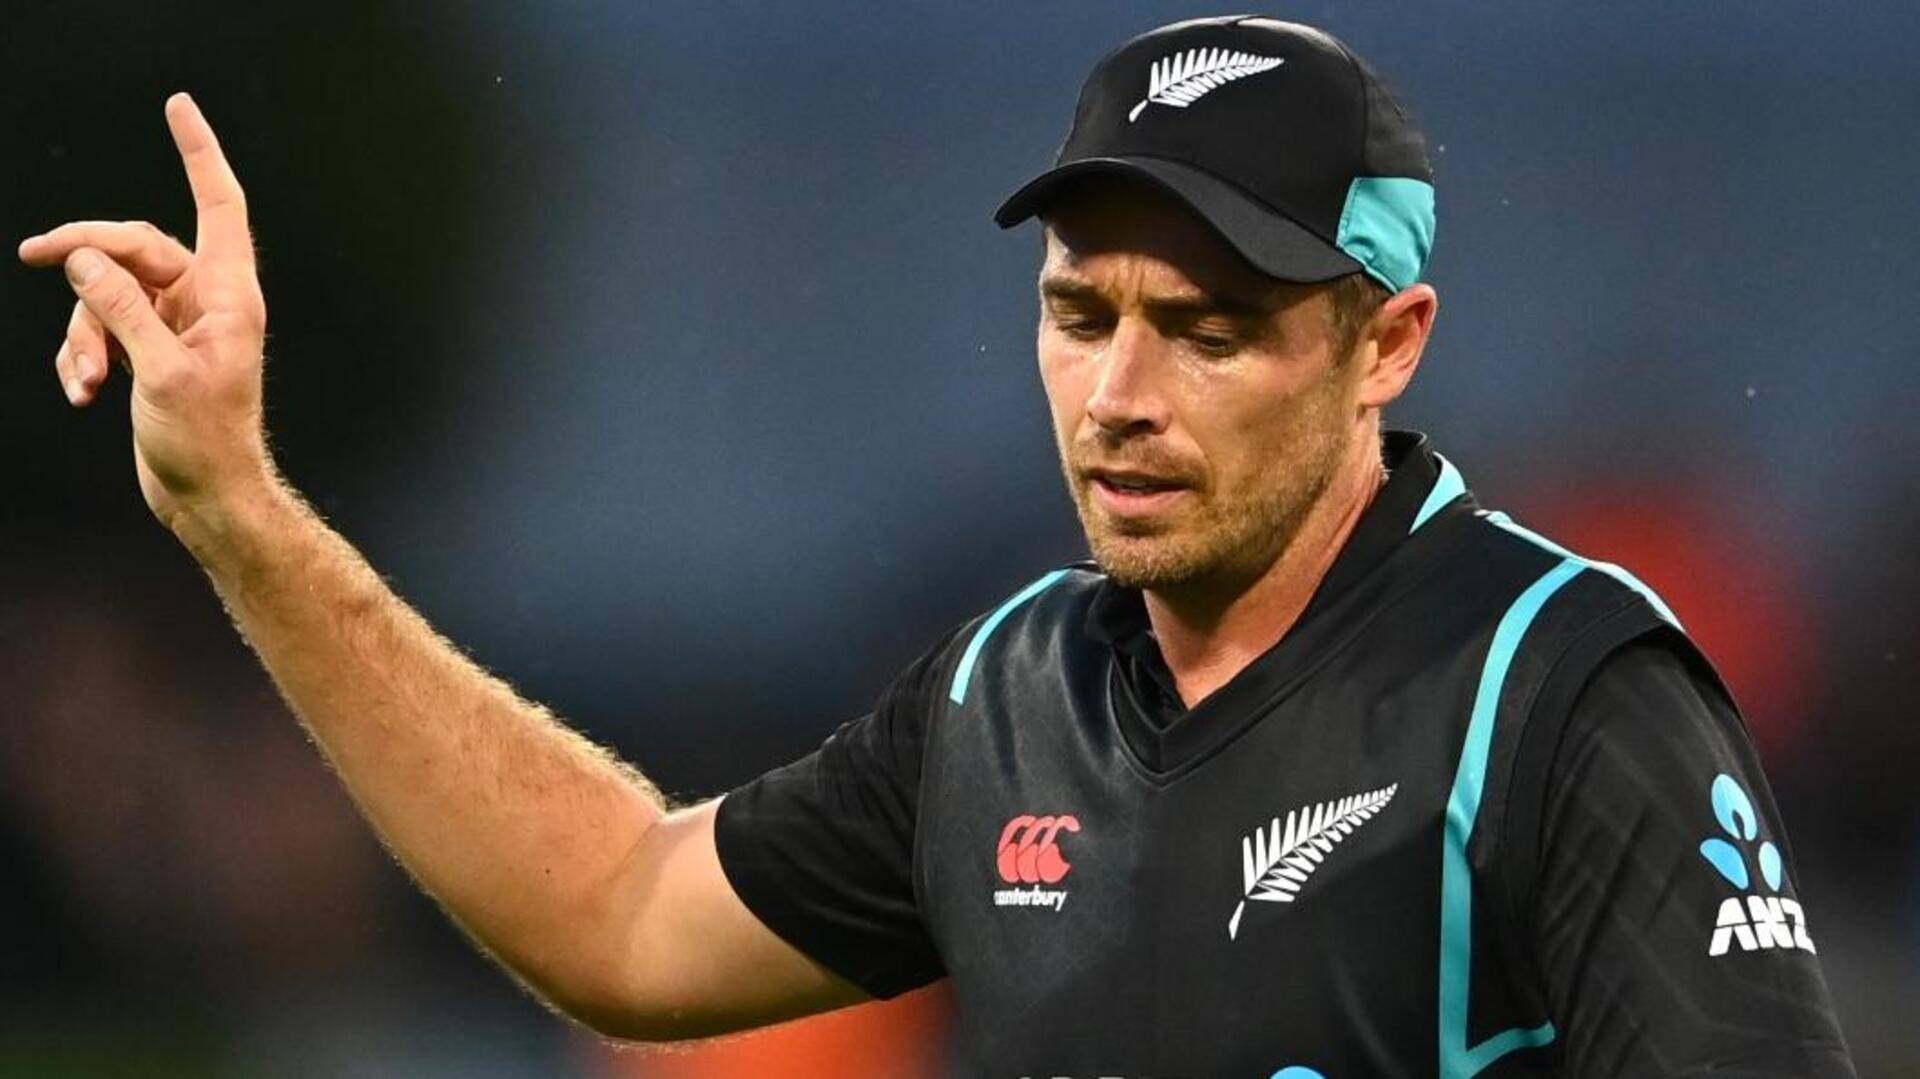 ICC World Cup: Tim Southee becomes New Zealand's second-highest wicket-taker